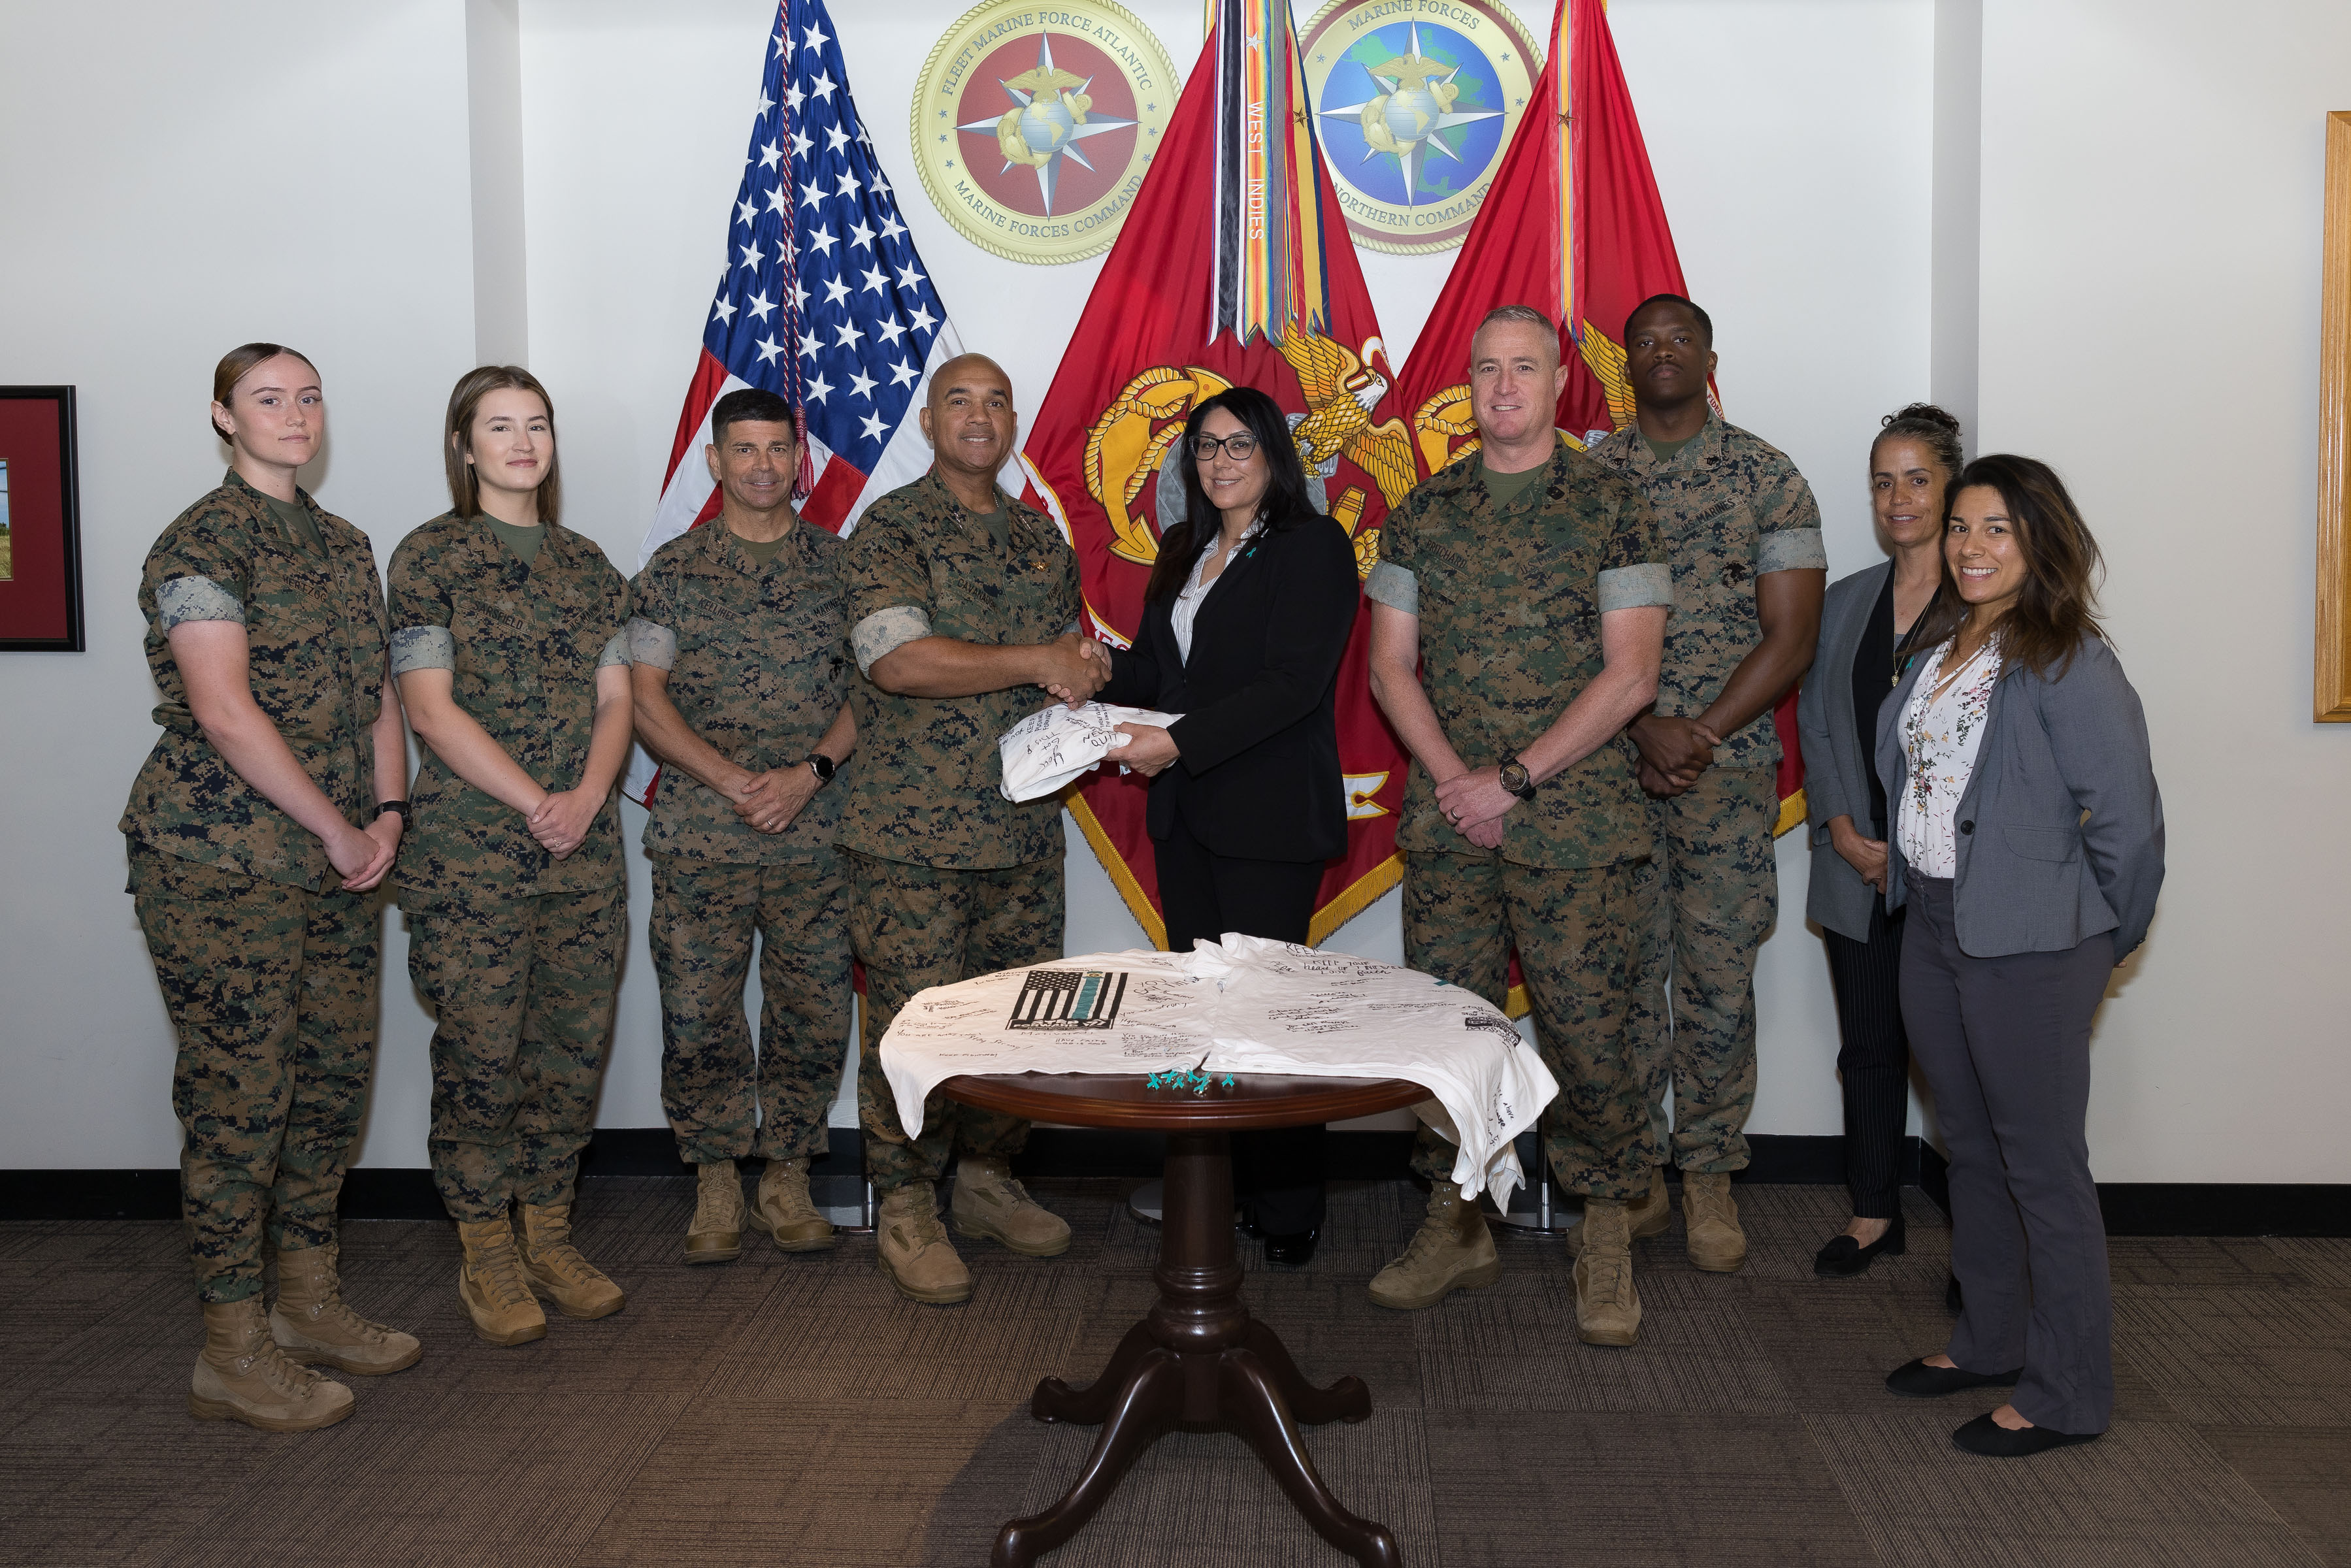 U.S Marine Corps Lt. Gen. Brian W. Cavanaugh, commander, Fleet Marine Force, Atlantic, Marine Forces Command; commanding general, Marine Forces Northern Command, center left, is presented a signed commemorative t-shirt by Ms. Christina Chavez, MARFORCOM Supervisory Sexual Assault Response Coordinator, center right, in honor of Sexual Assault Awareness and Prevention Month (SAAPM) at MARFORCOM headquarters on Naval Support Activity Hampton Roads, Virginia, May 5, 2023. During the signing ceremony, MARFORCOM leadership expressed their support for the 2023 SAAPM advocacy campaign and call-to-action theme: "STEP FORWARD. Prevent. Report. Advocate." Every April, SAAPM highlights how sexual harassment, sexual assault, and sexual abuse impact every person in the community. By raising public awareness SAAPM aims to educate communities on how to prevent sexual violence. (U.S. Marine Corps photo by Casey Price)